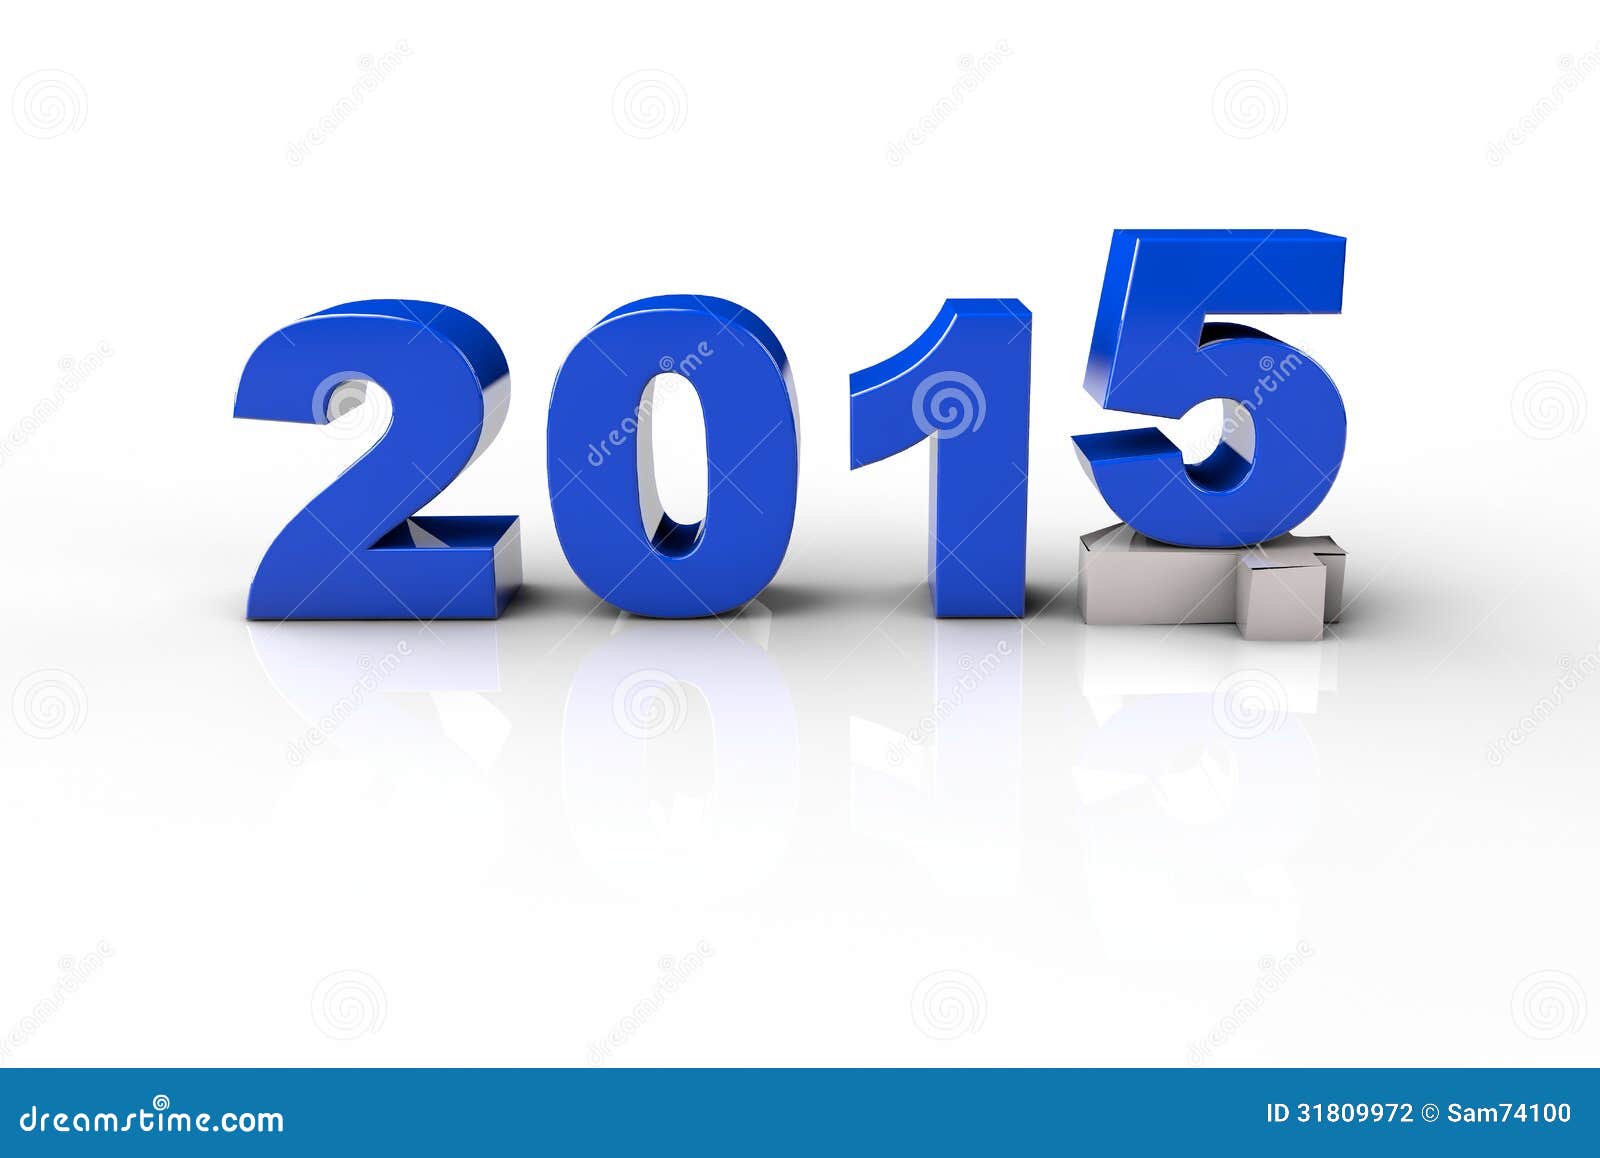 clipart new years eve 2014 - photo #49